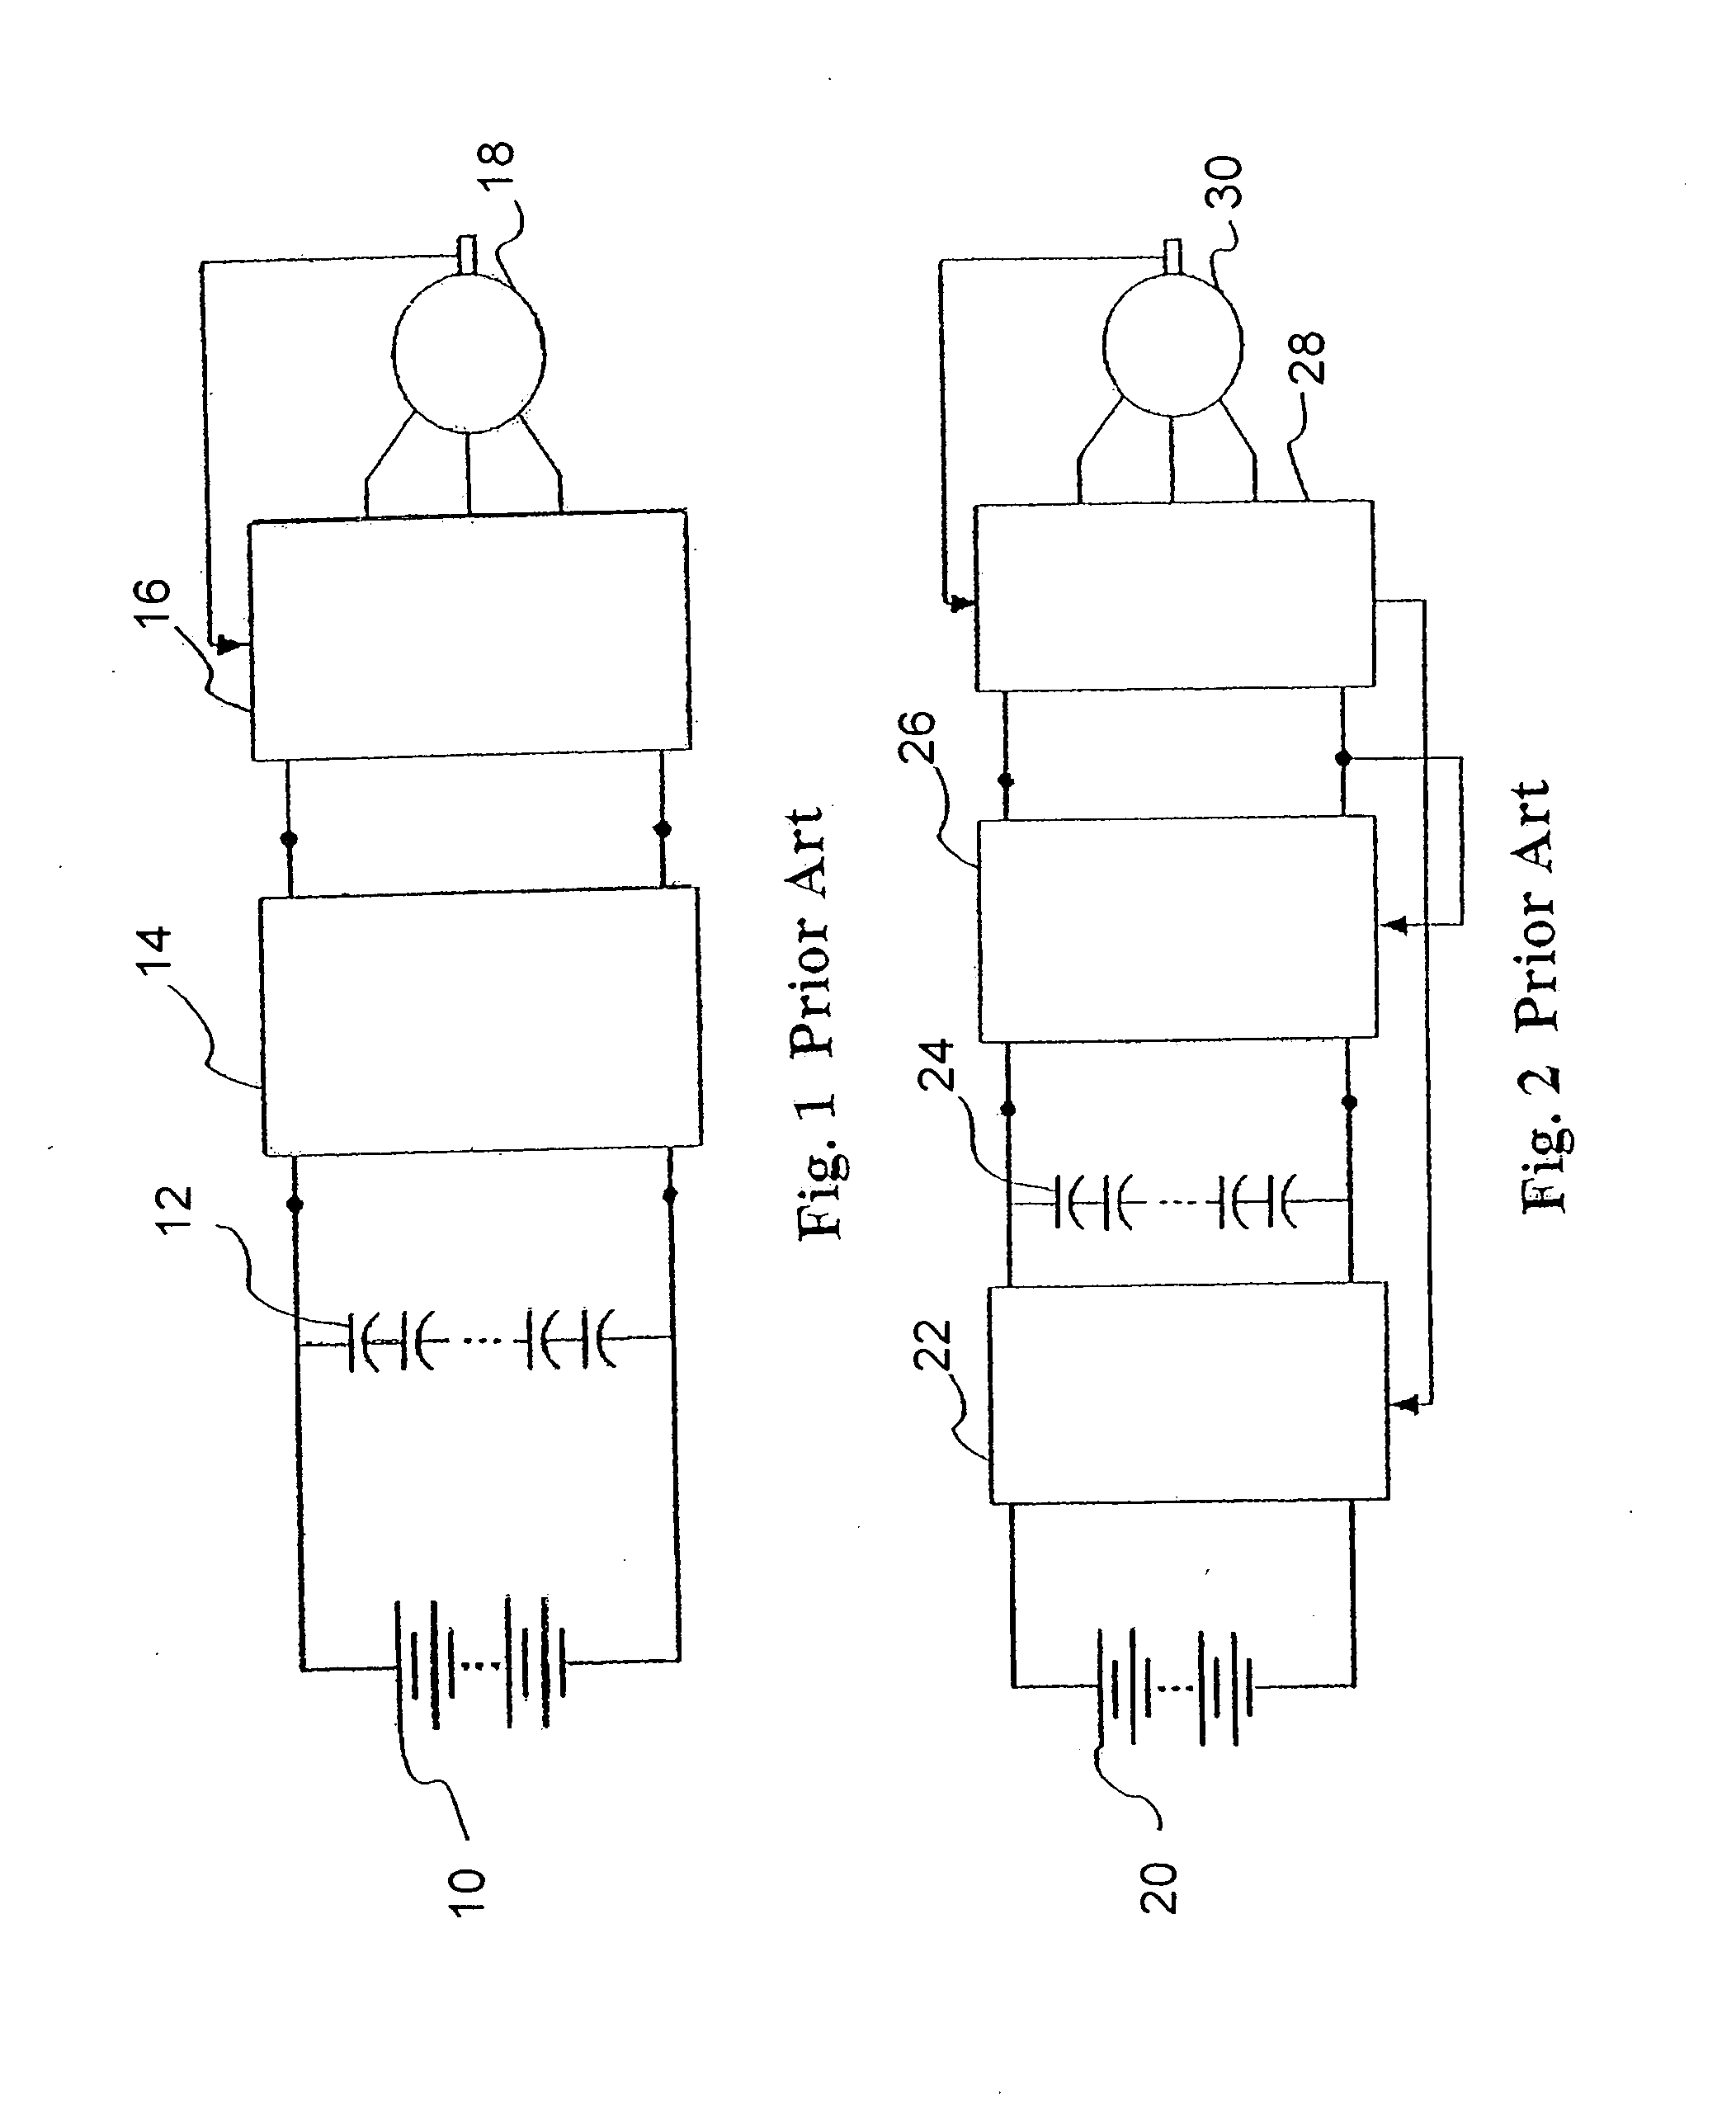 Power management for multi-module energy storage systems in electric, hybrid electric, and fuel cell vehicles